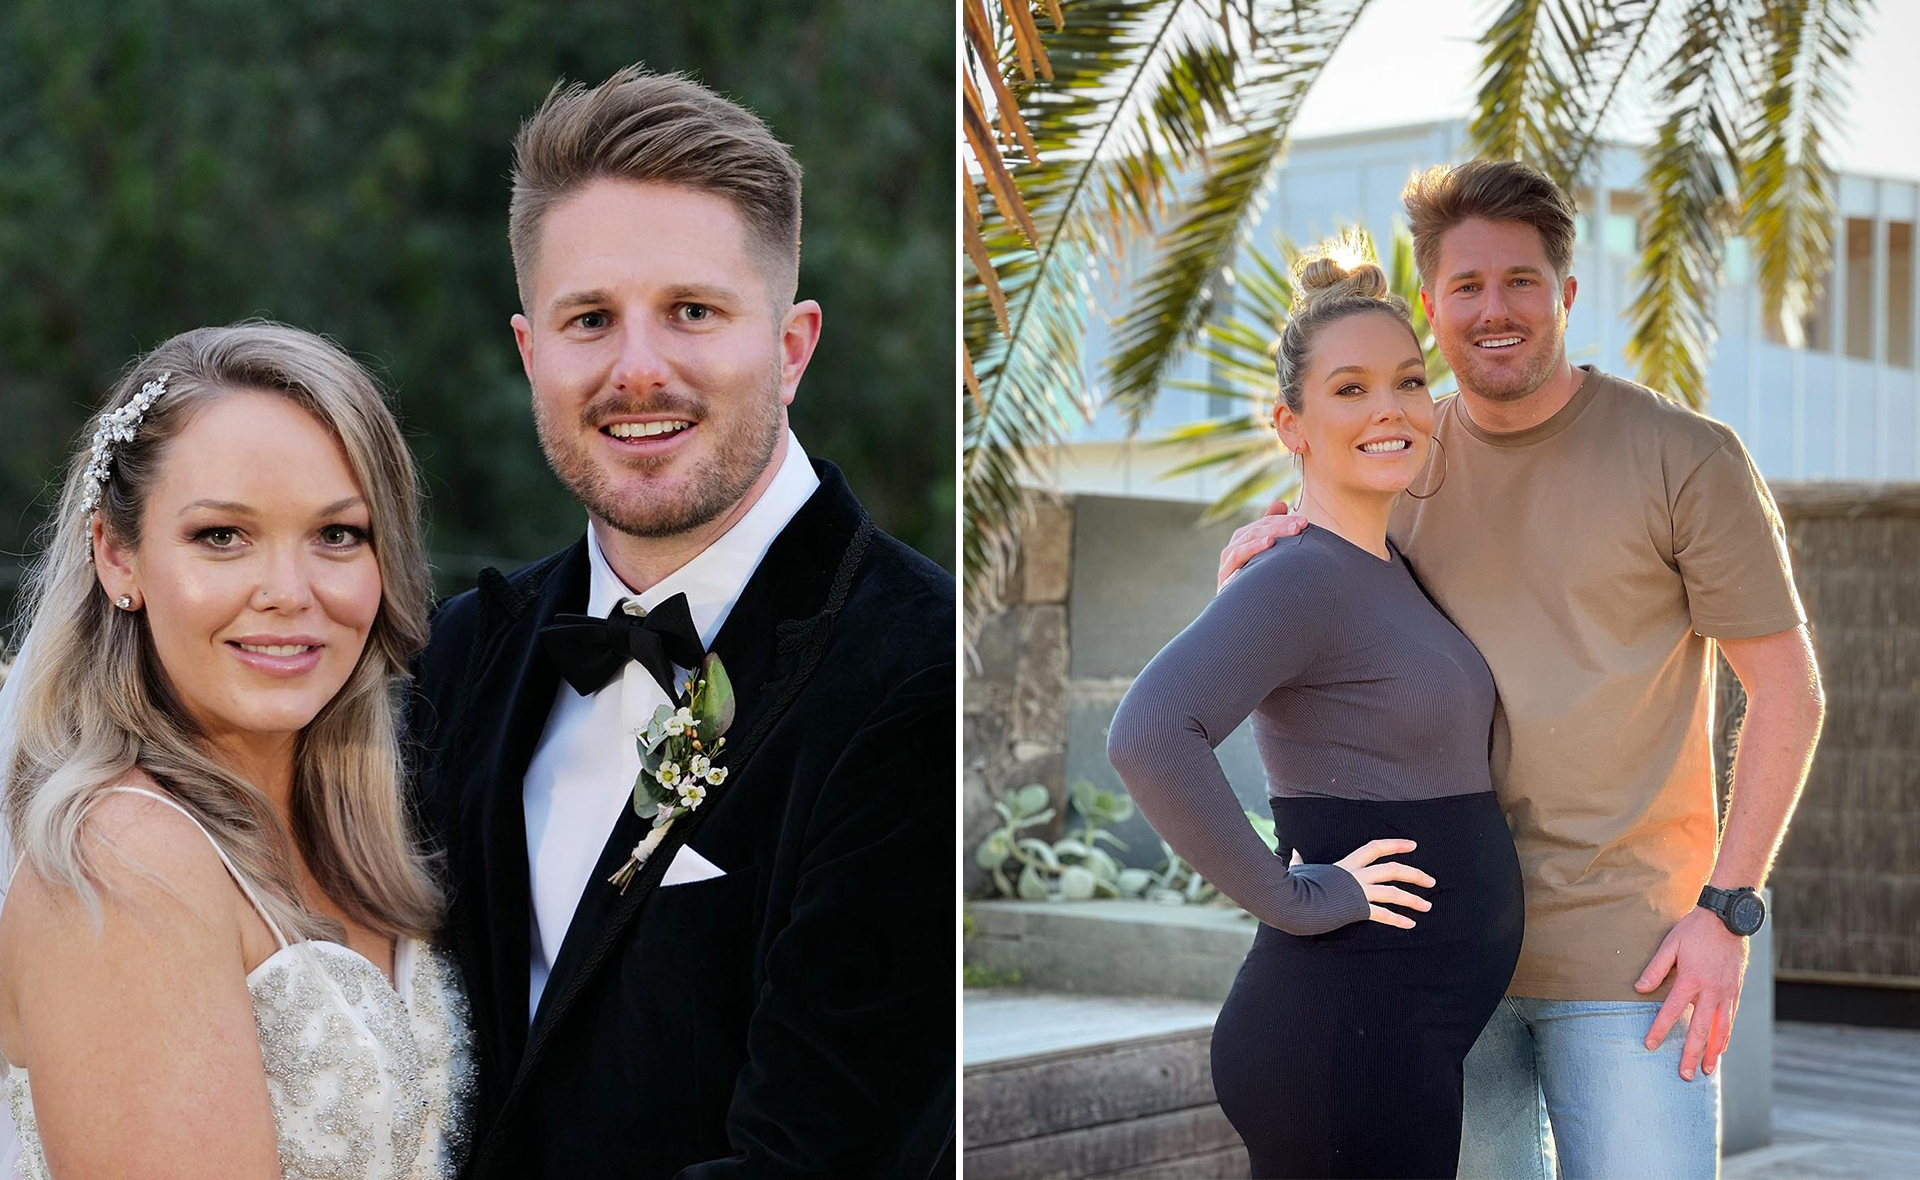 MAFS stars Bryce Ruthven and Melissa Rawson reveal the surprising moment they fell in love with each other